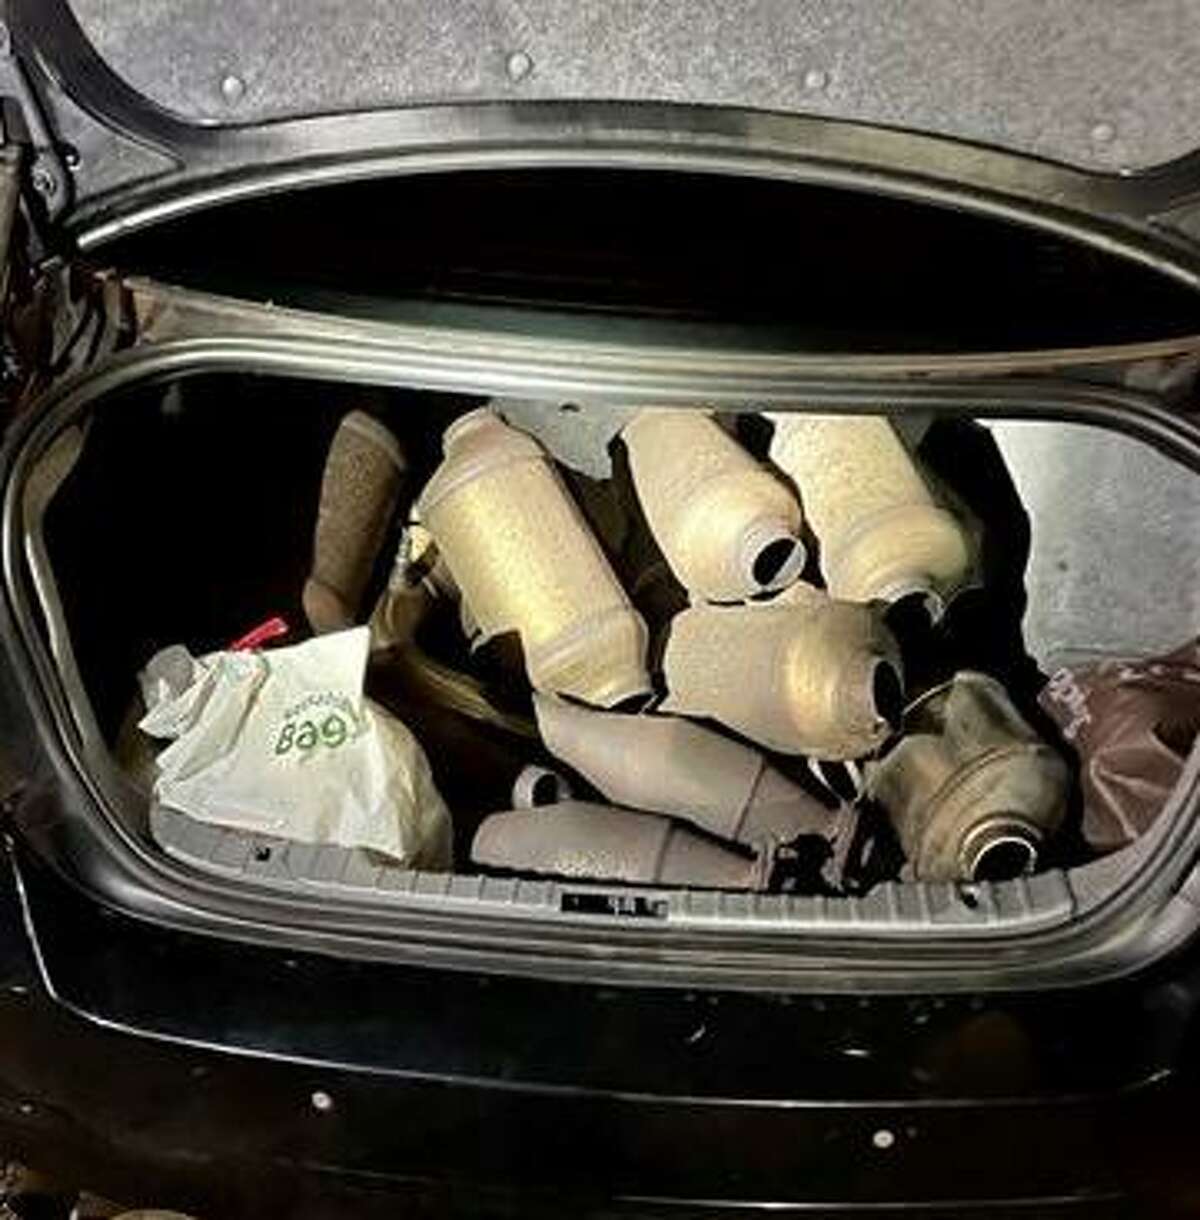 Norwalk police said officers recovered 13 catalytic converters in the trunk of a car that appeared to have been recently cut from vehicles earlier this year.